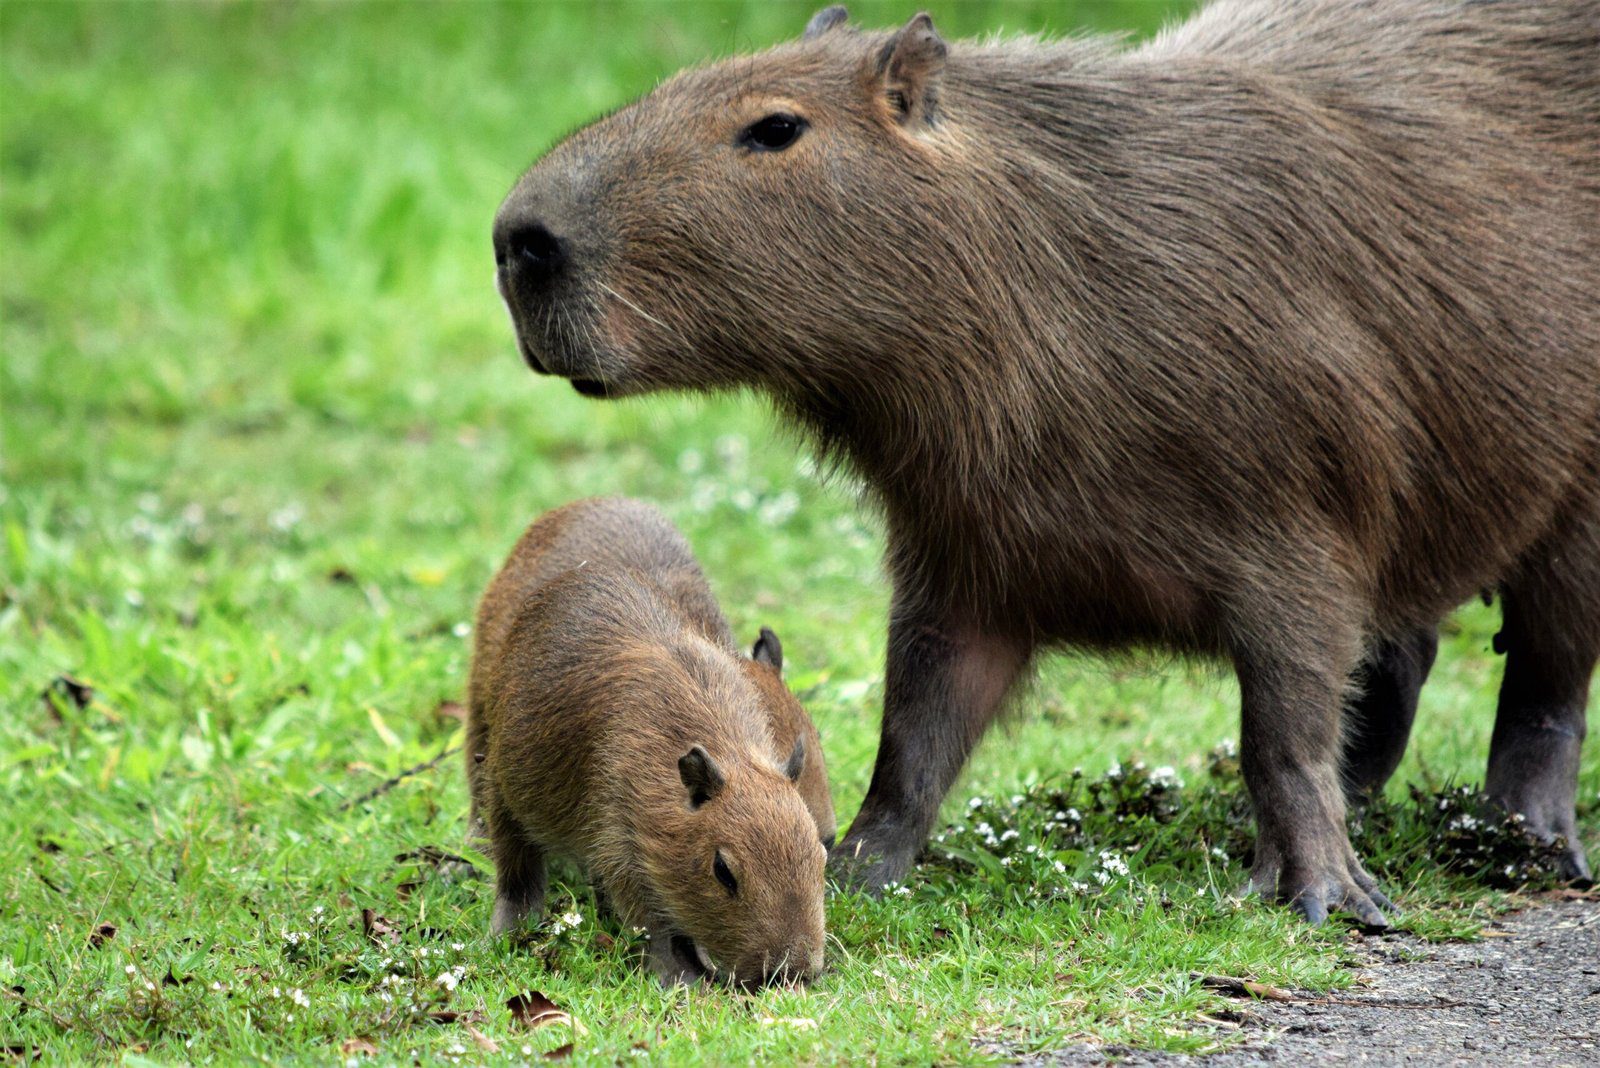 Are There Capybaras in Hawaii?